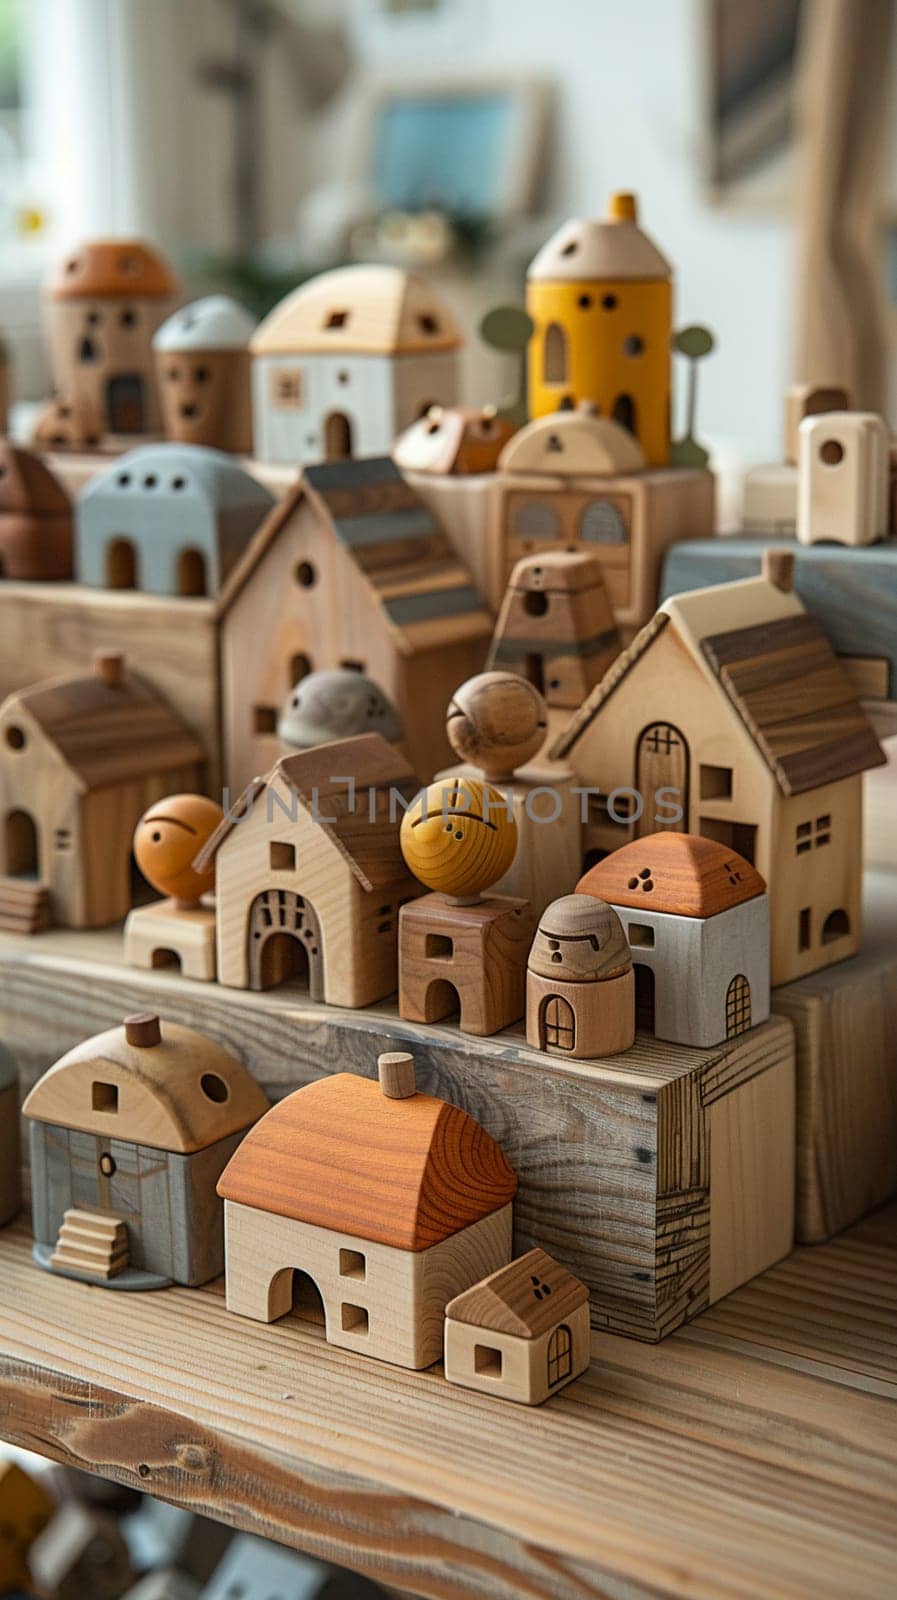 Wooden Toy Workshop Carves Childhood Memories in Business of Handcrafted Playthings by Benzoix